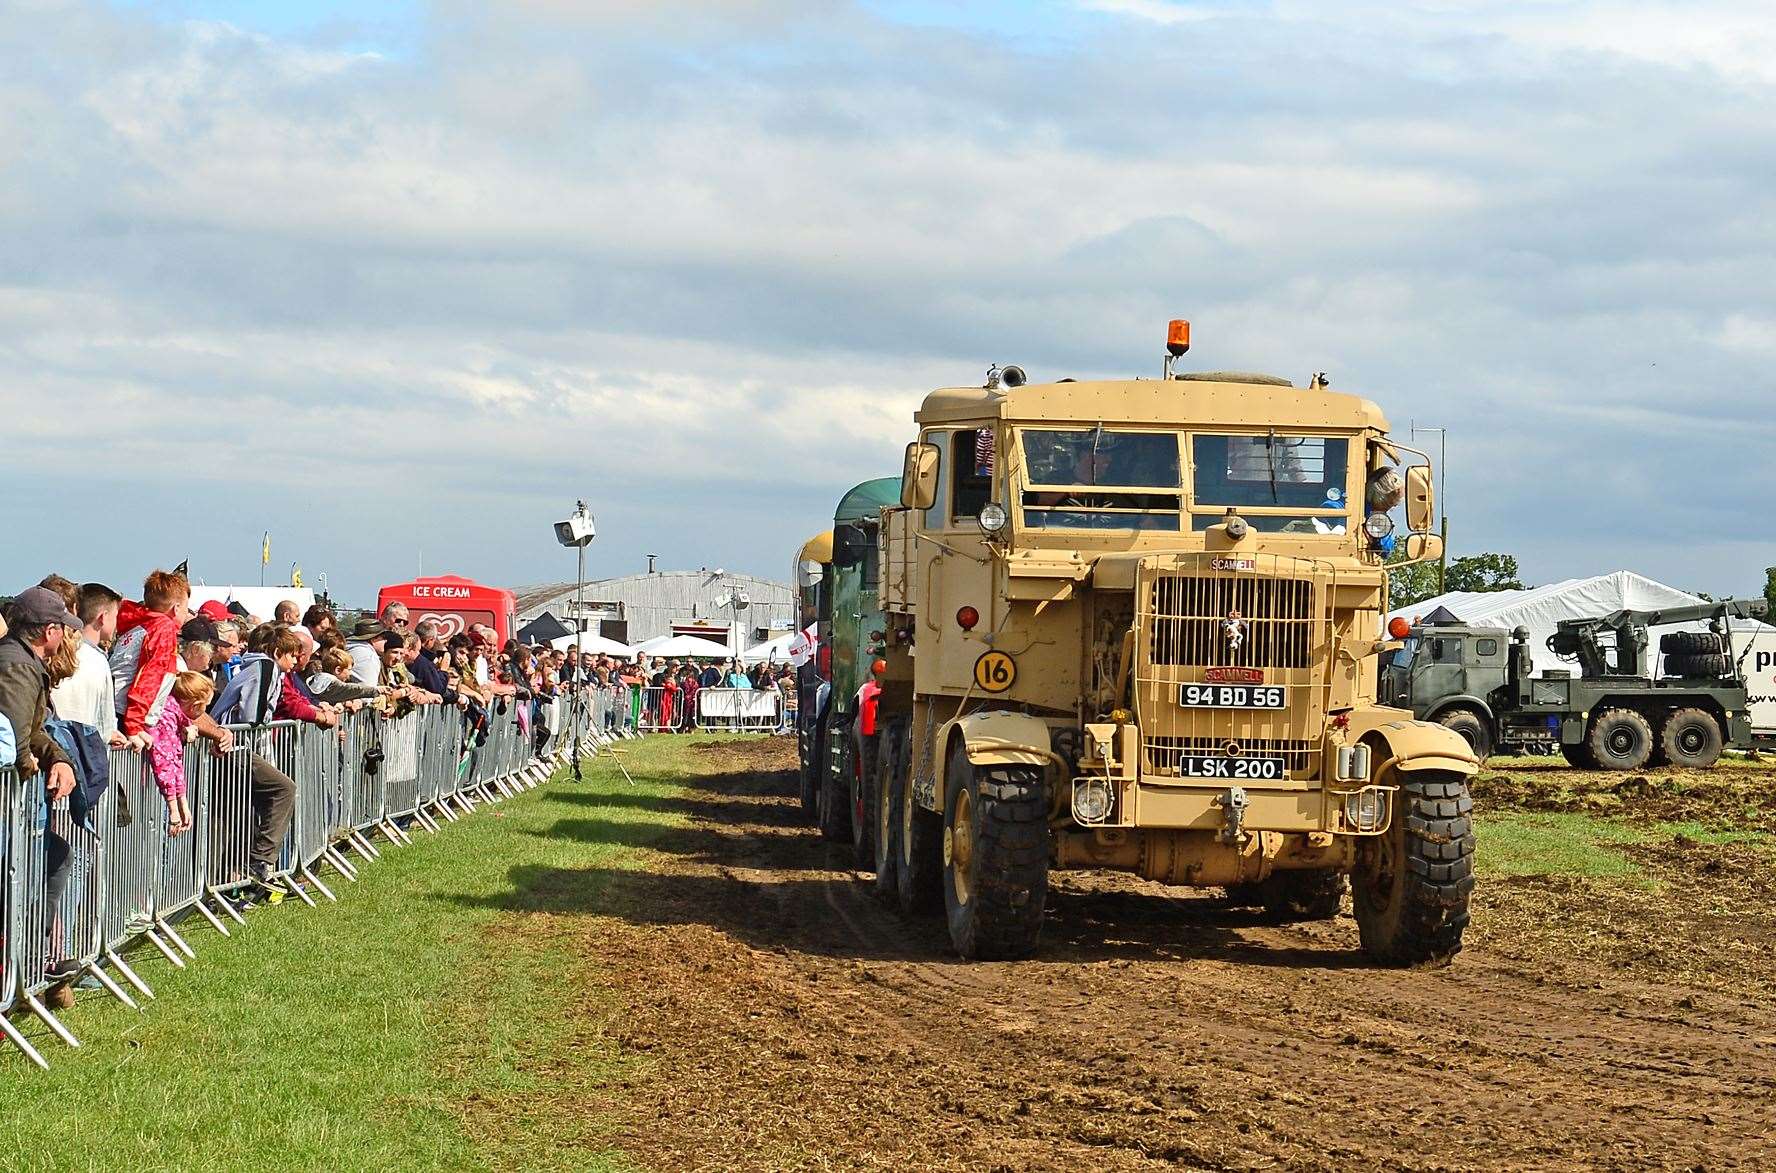 The military vehicle display is a huge show that will delight any transport enthusiasts. Picture: Big Plan Group